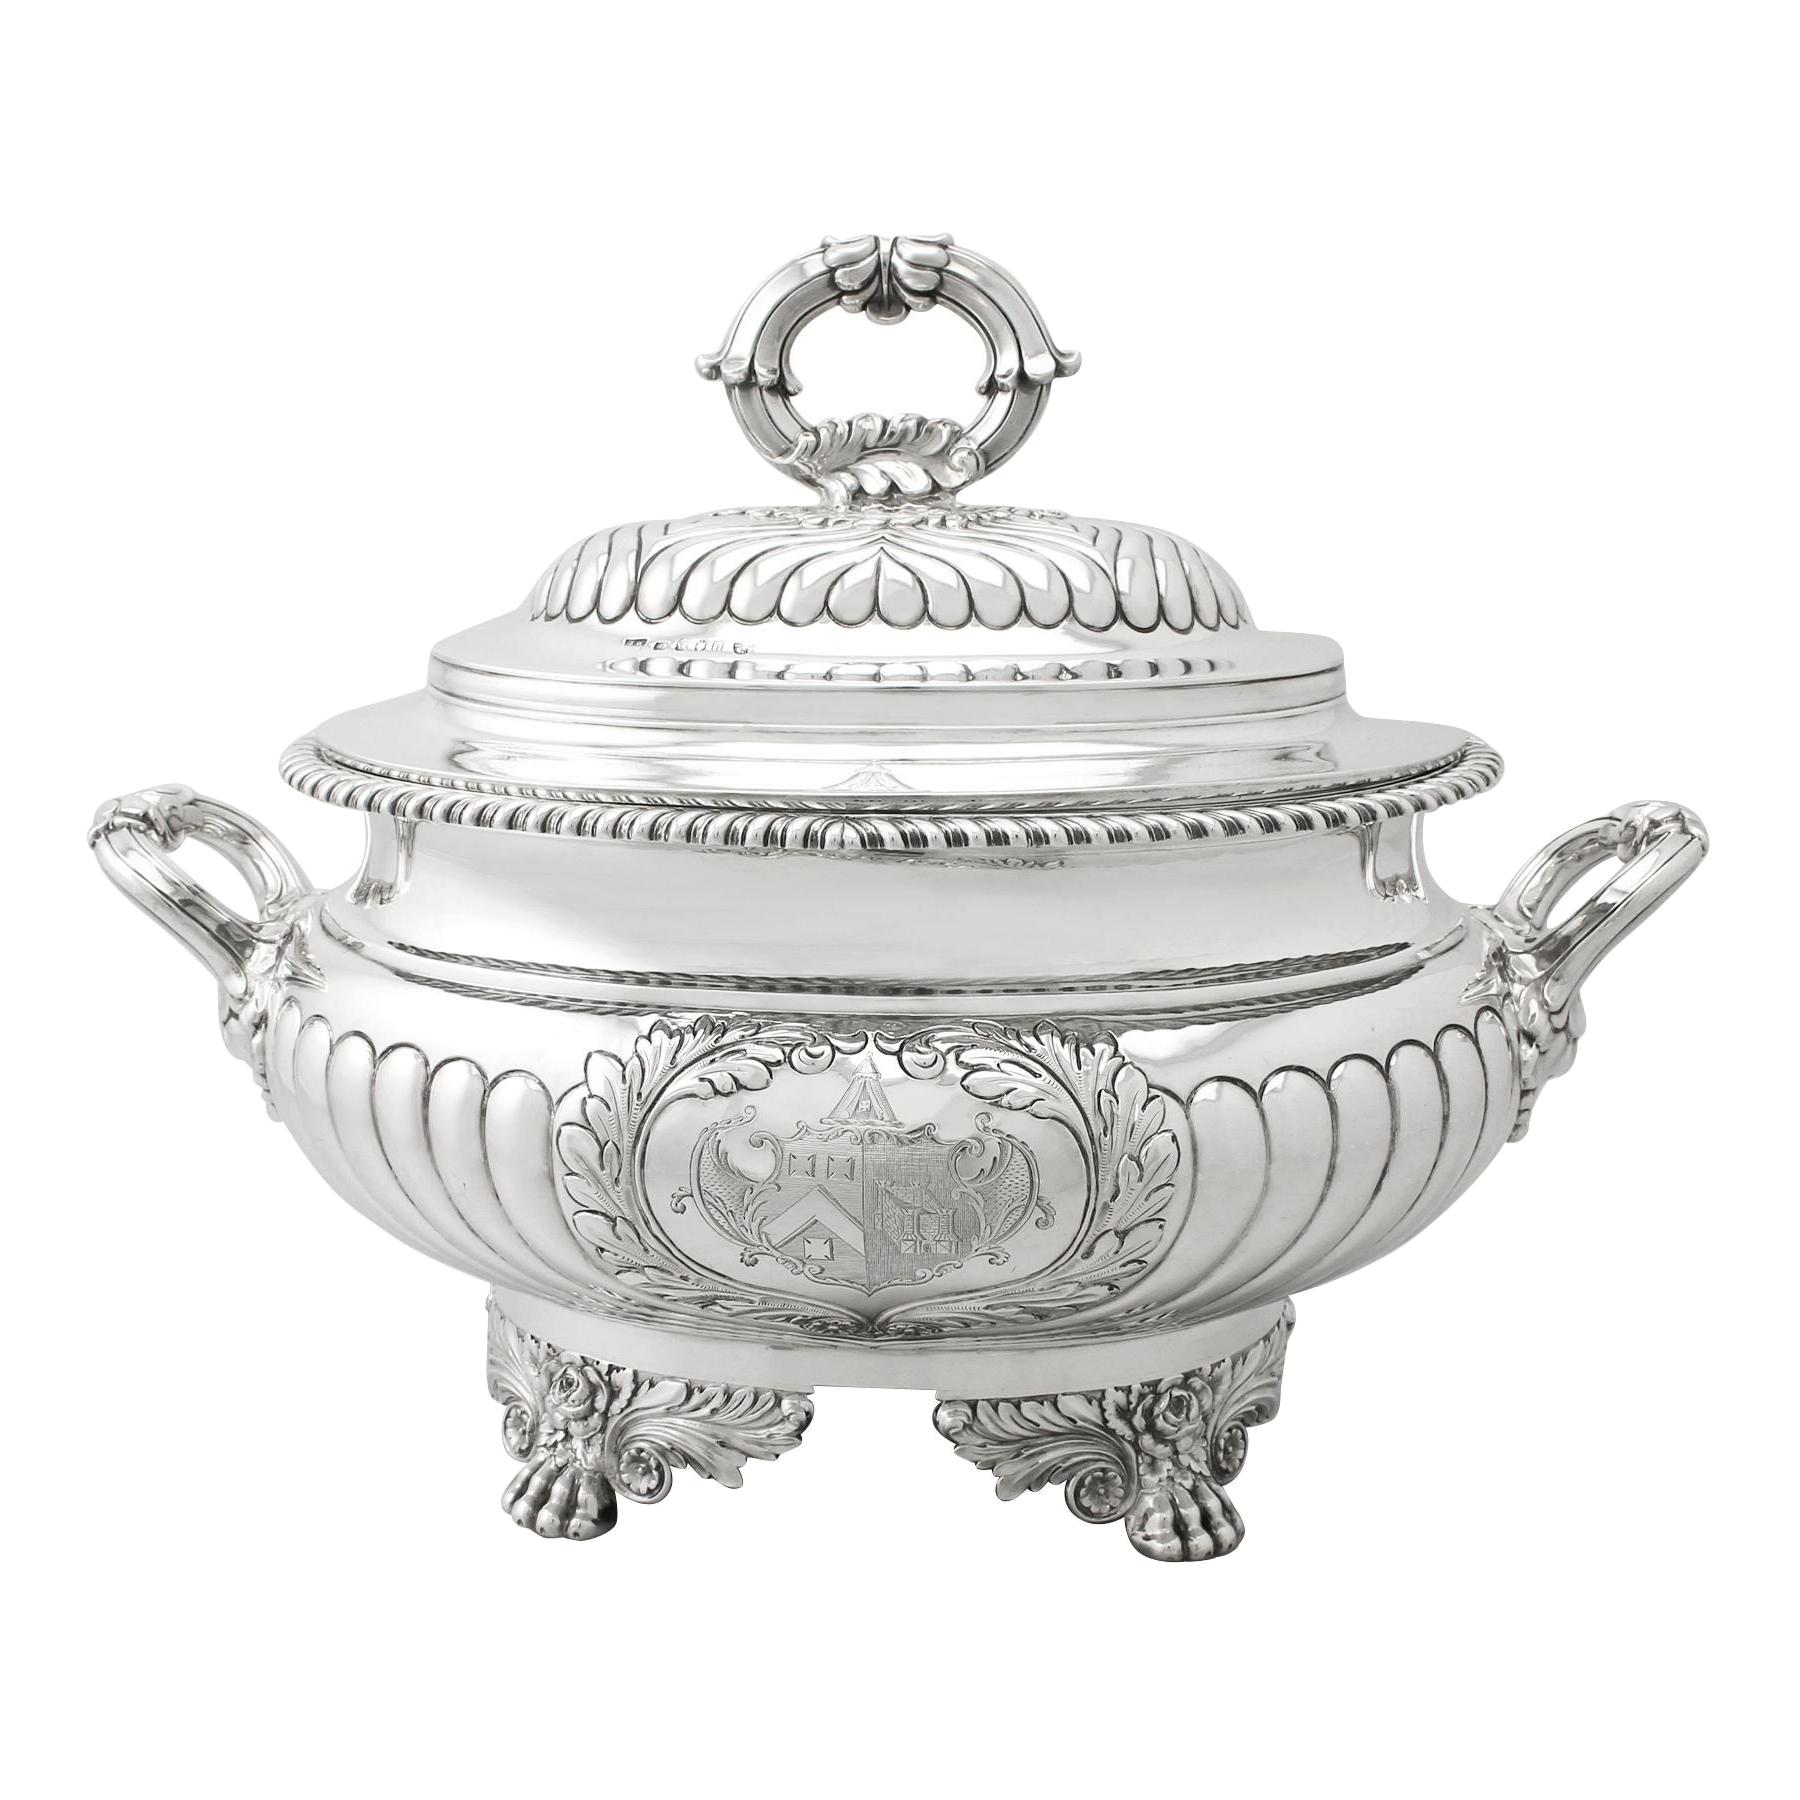 Antique George IV Sterling Silver Soup Tureen or Centerpiece